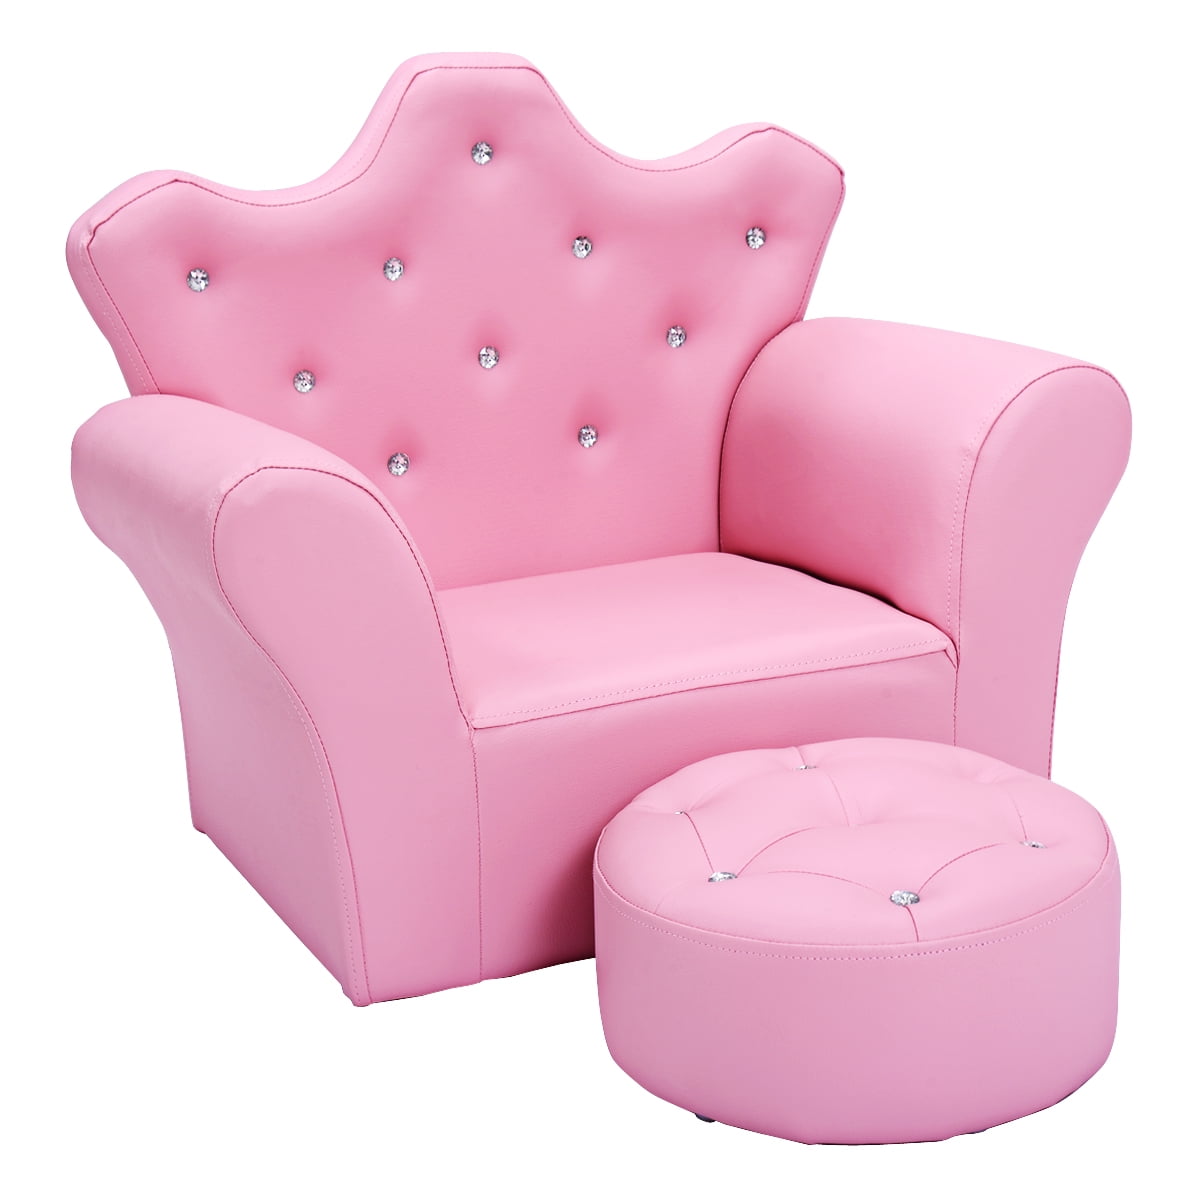 Rose Red Gift for Girls & Boys Kids Sofa Armchair Chair Seat with Free Footstool PU Leather for Baby Bedroom Game Playroom 